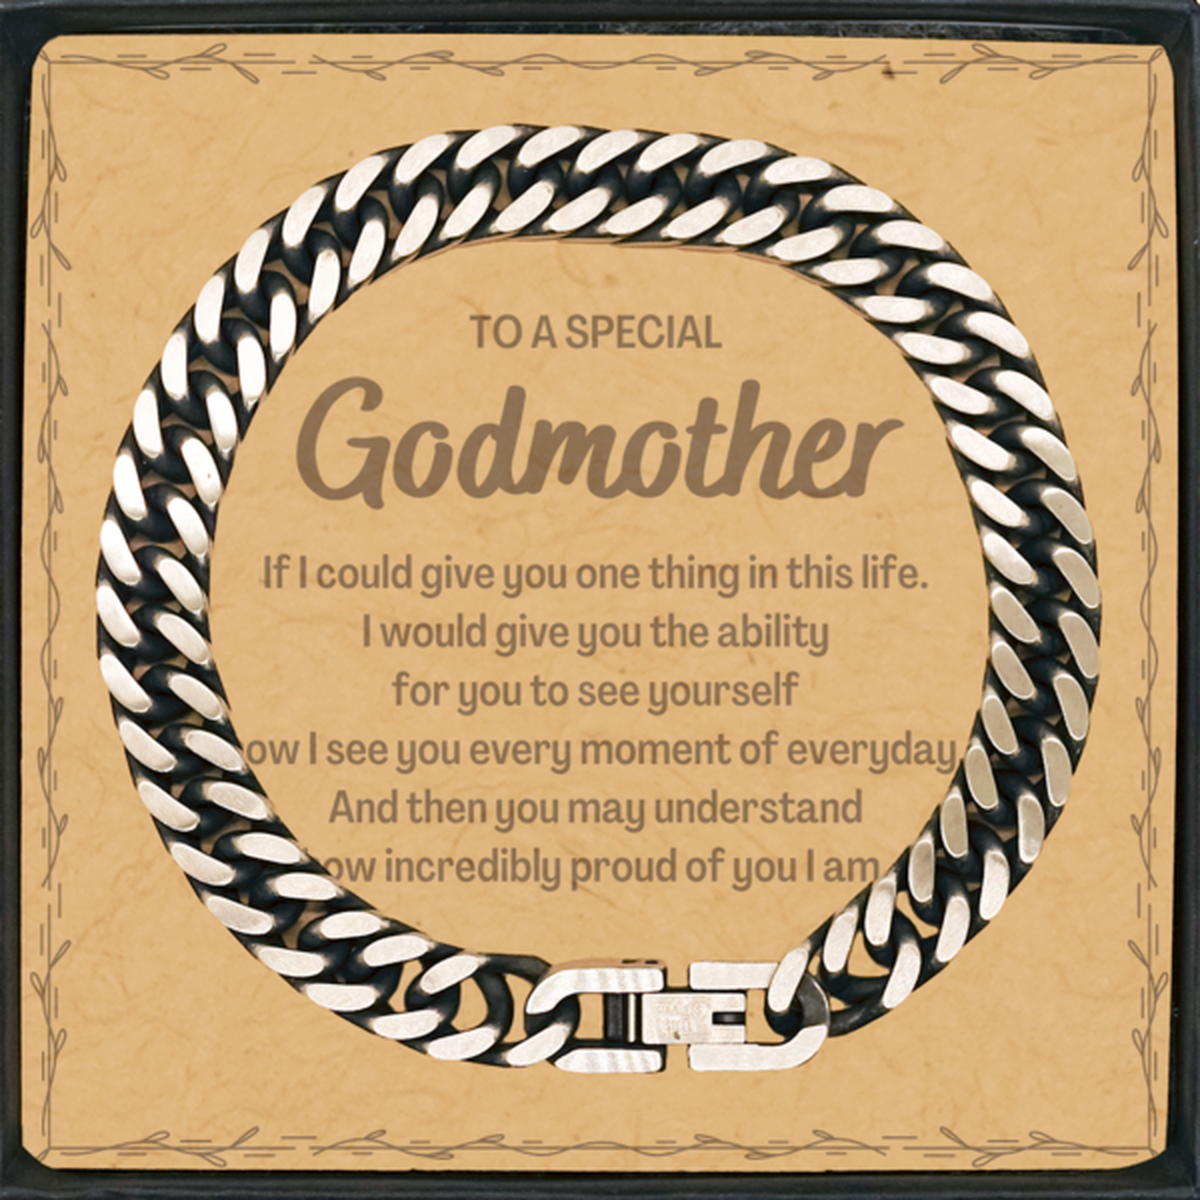 To My Godmother Cuban Link Chain Bracelet, Gifts For Godmother Message Card, Inspirational Gifts for Christmas Birthday, Epic Gifts for Godmother To A Special Godmother how incredibly proud of you I am